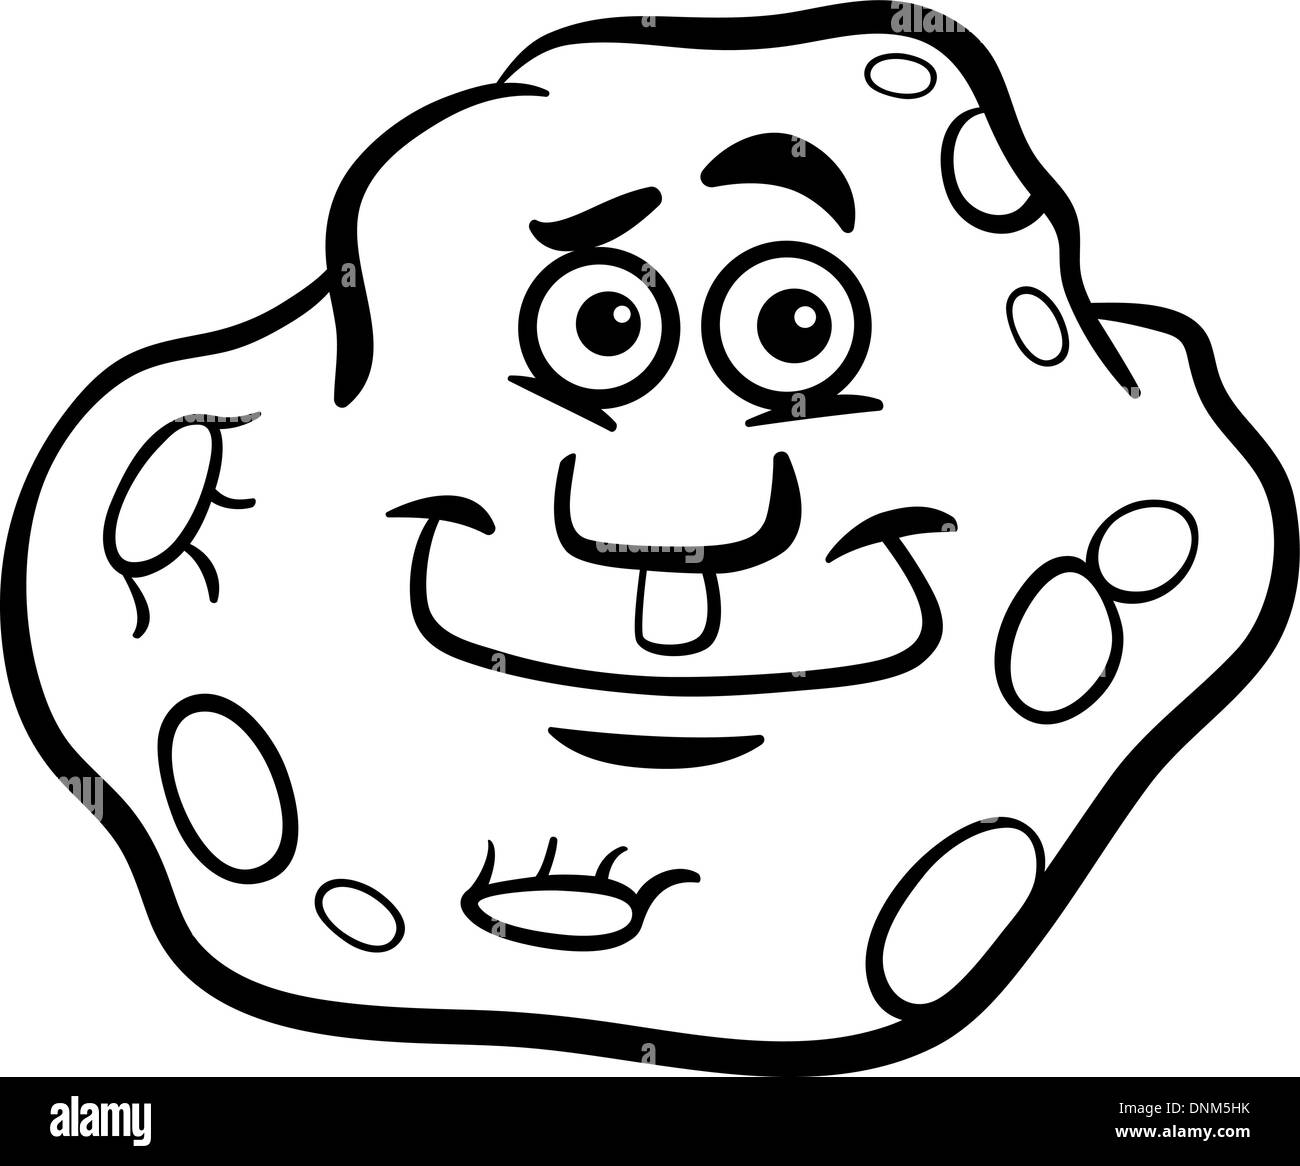 Asteroid drawing Black and White Stock Photos & Images - Alamy